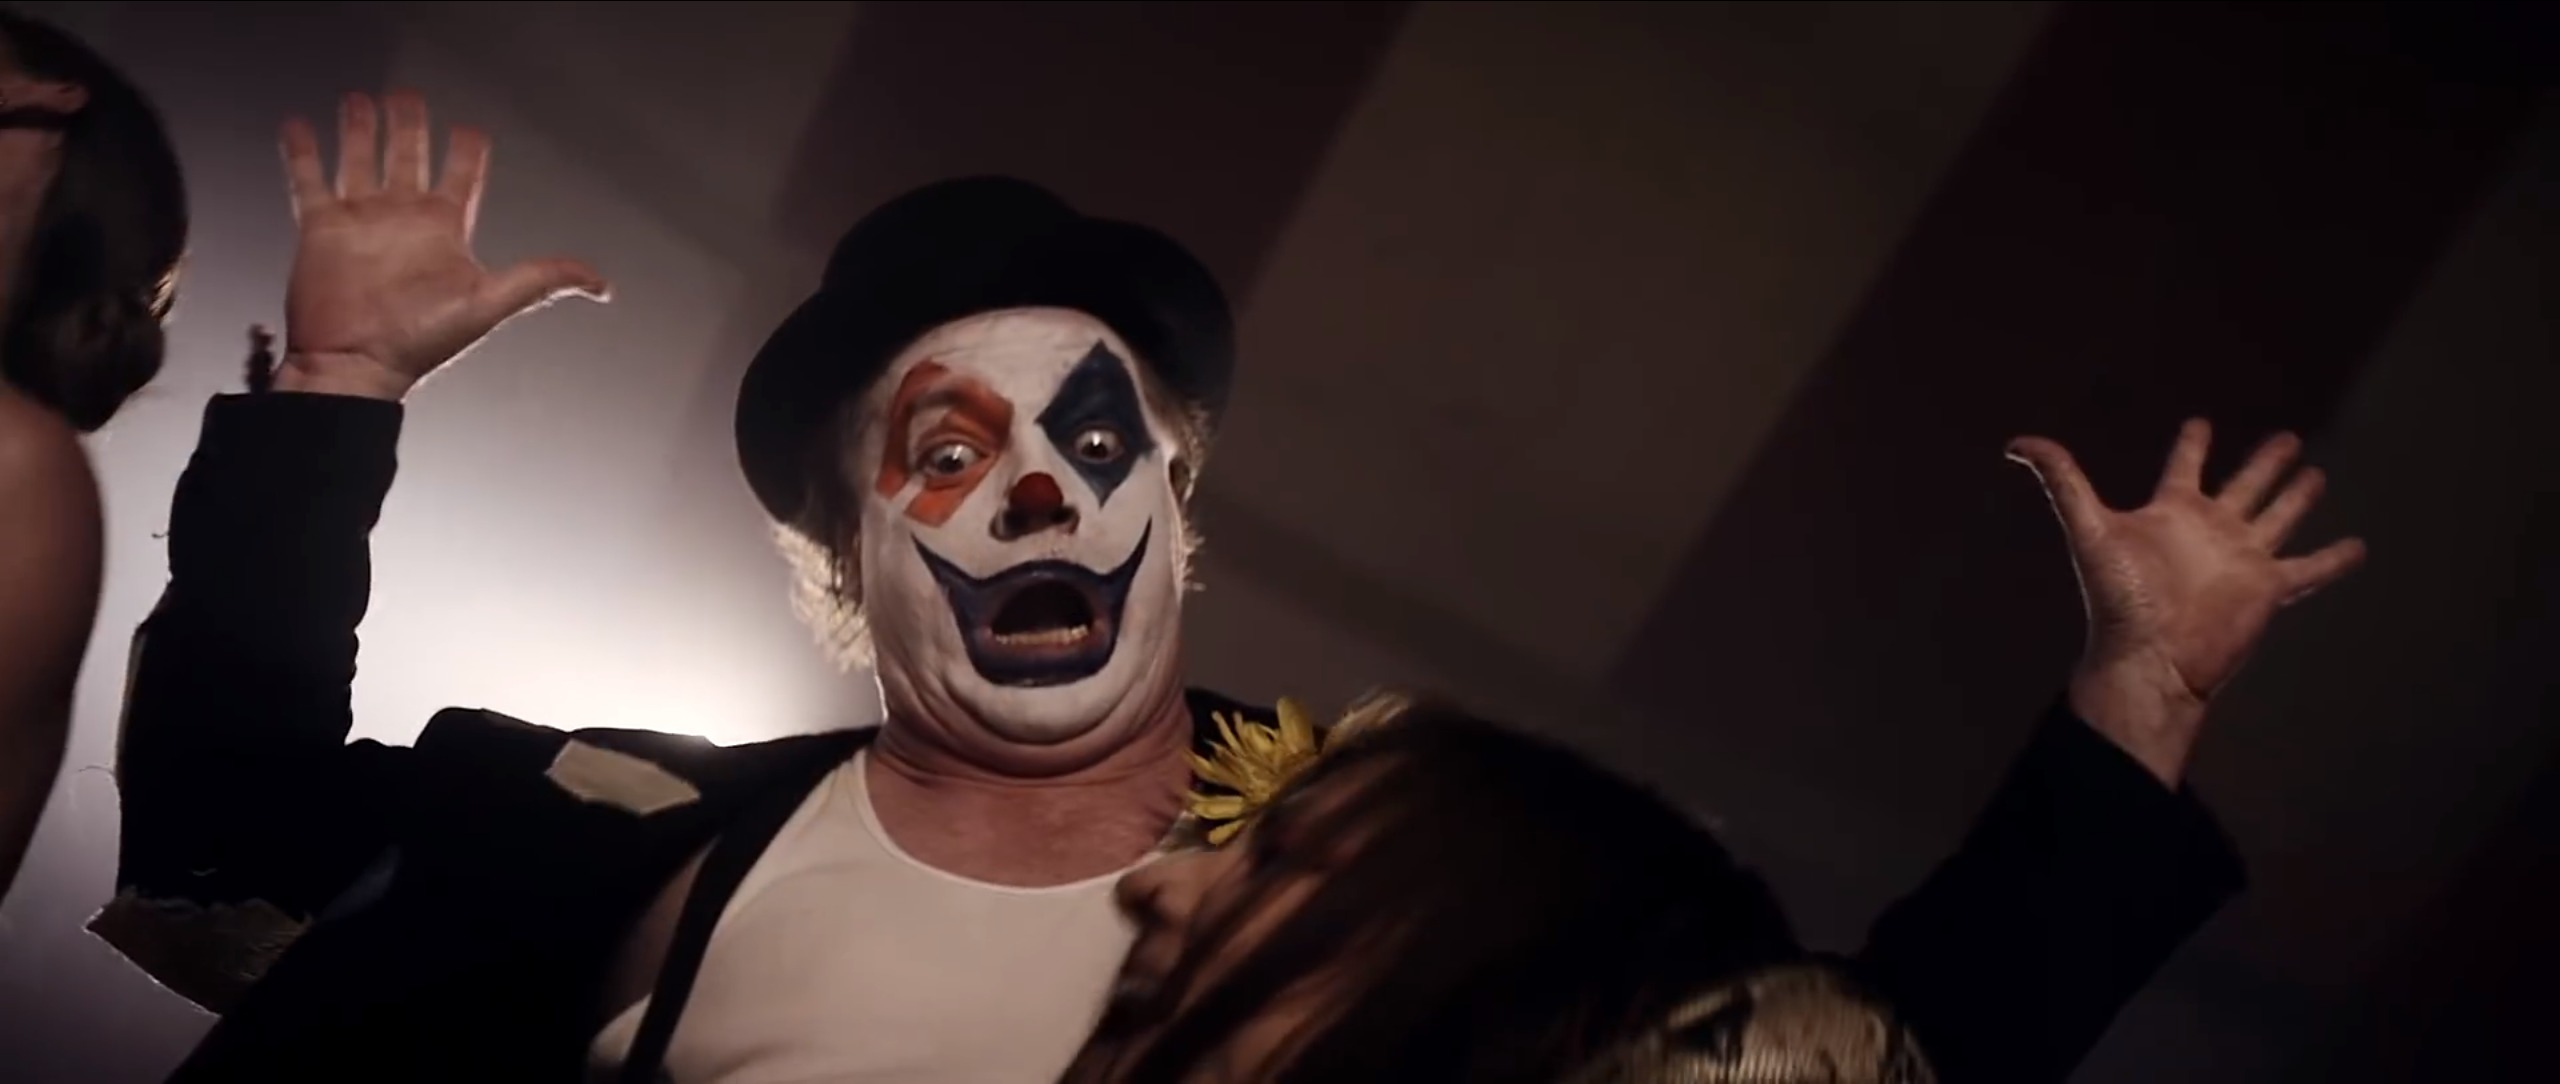 Music Video, Scary Clown, Ringling Road, Friday Night Freak Show, William Clark Green